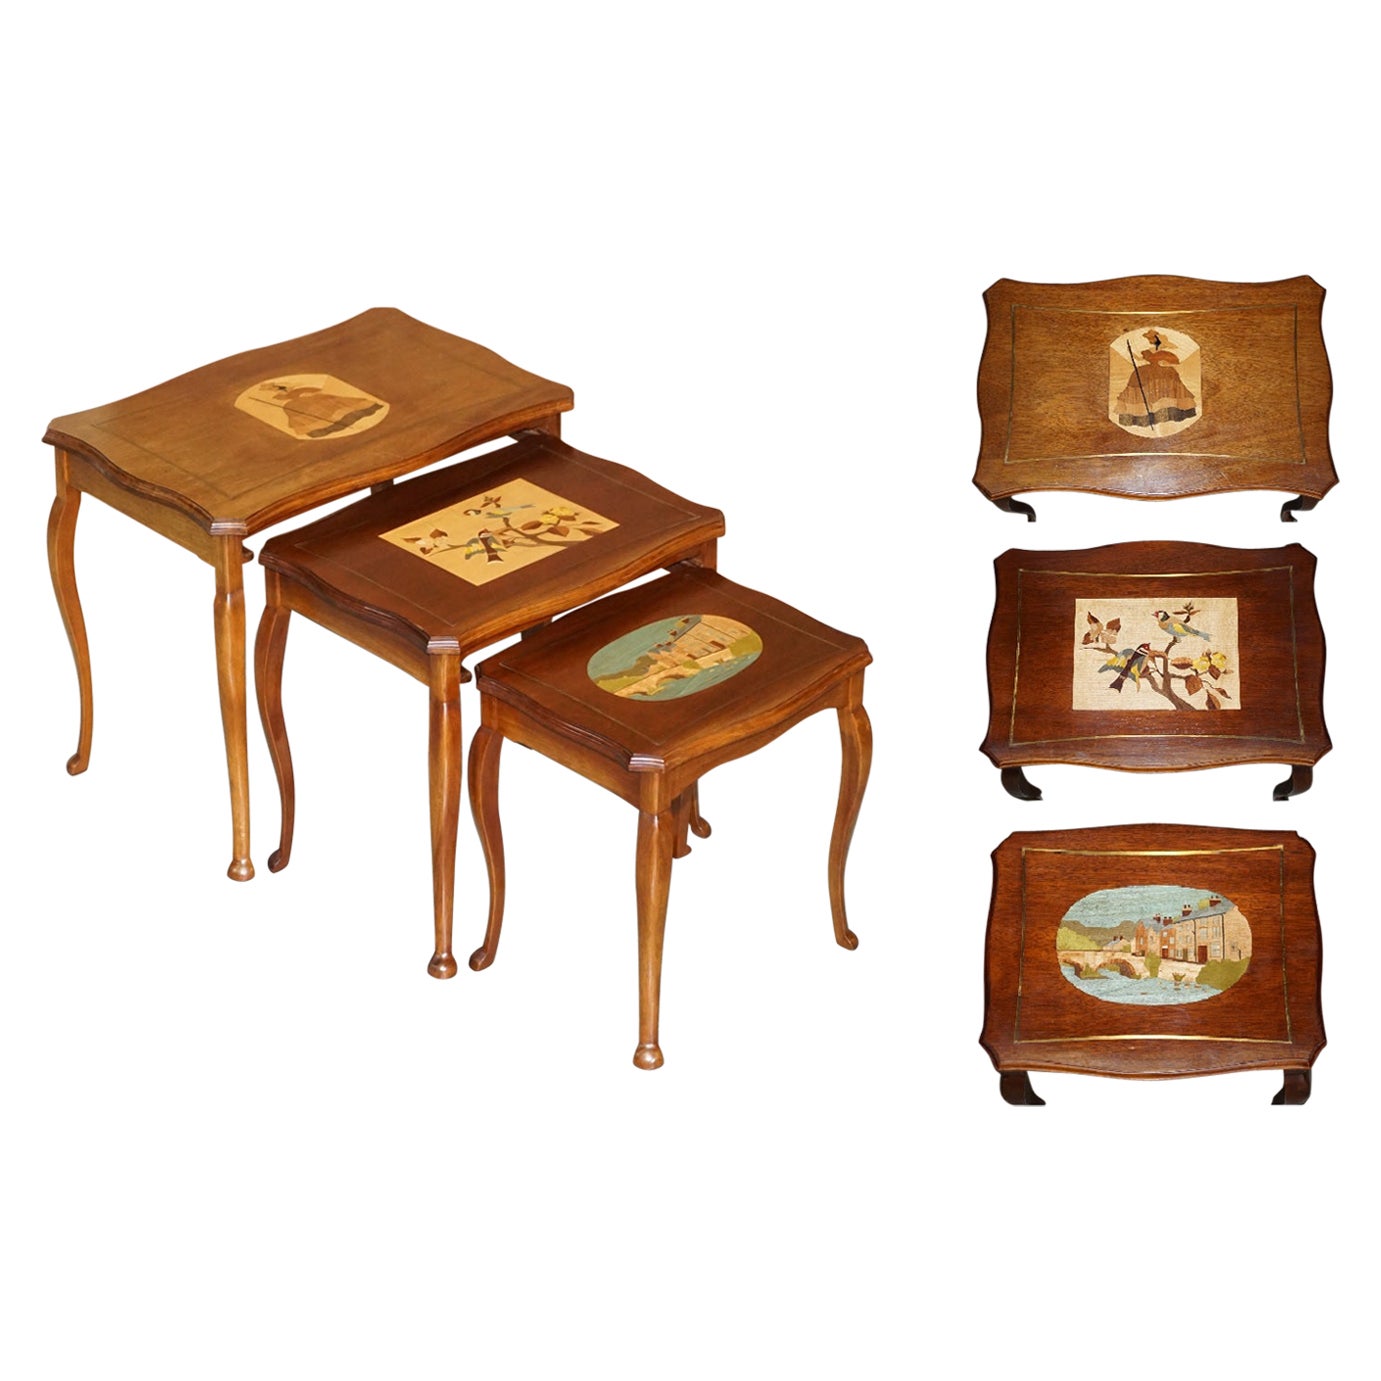 Vintage Nest of Tables with Hand Painted Marquetry Inlaid Tops Very Decorative